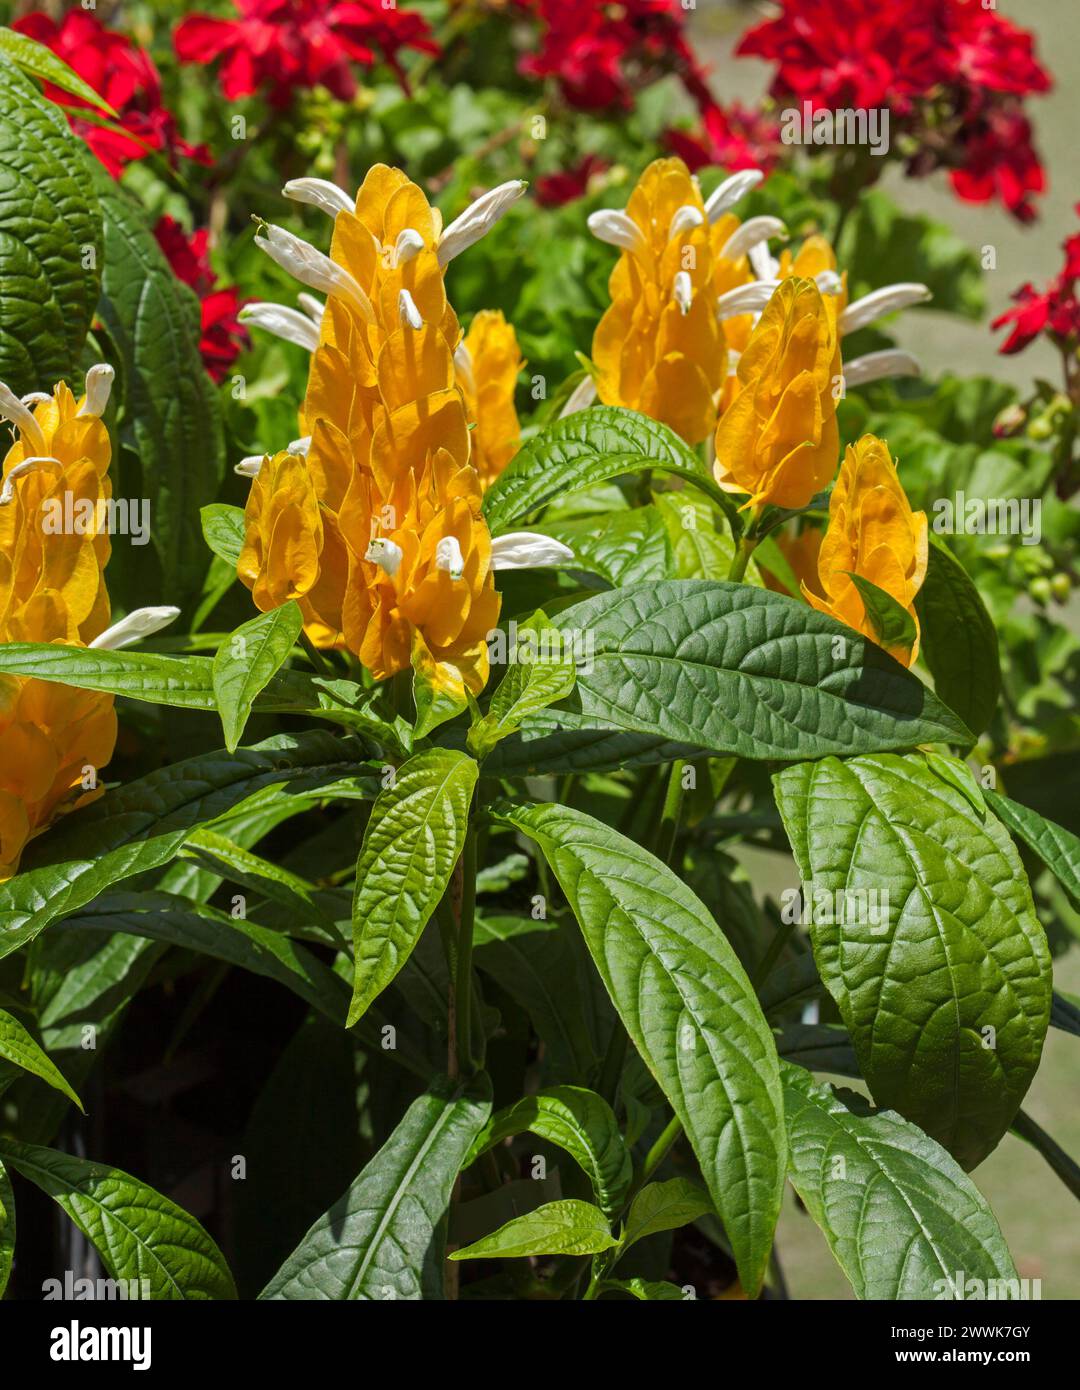 Tall golden yellow bracts, white flowers and bright green leaves of evergreen shrub Pachystachys lutea, Golden Candles, in an Australian garden Stock Photo